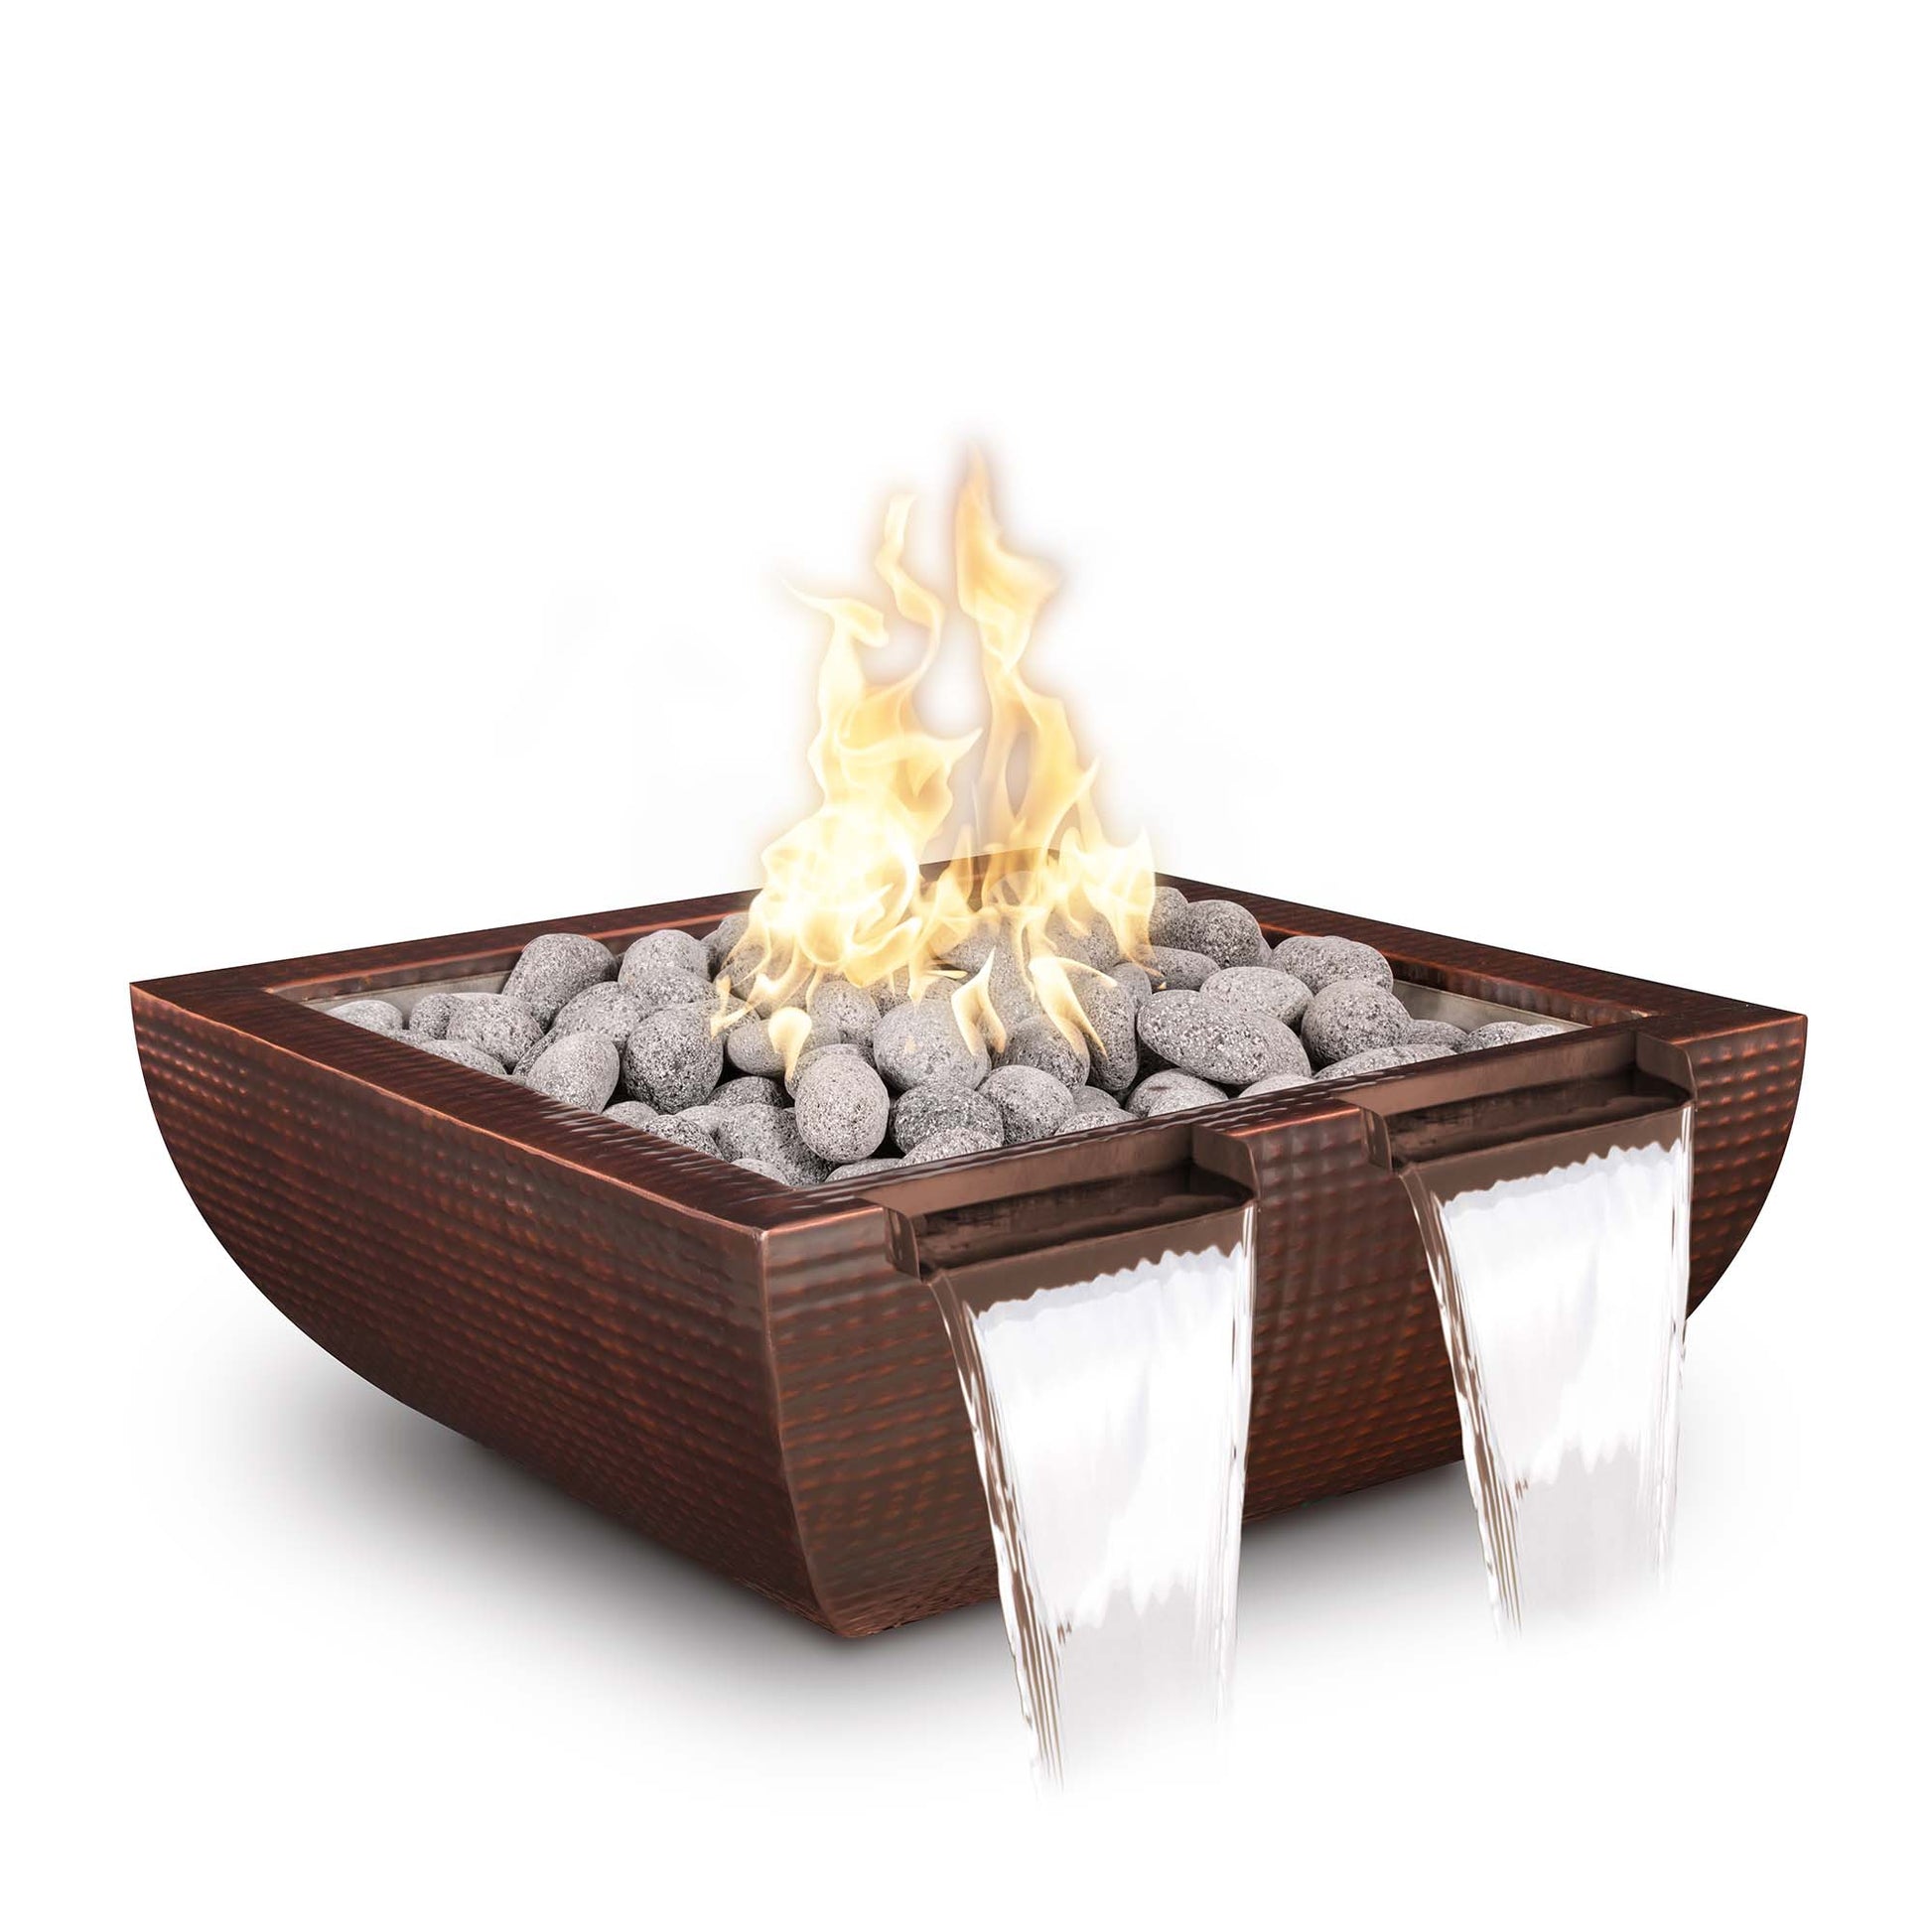 The Outdoor Plus Avalon Twin Spill 24" Black Powder Coated Metal Liquid Propane Fire & Water Bowl with Match Lit with Flame Sense Ignition